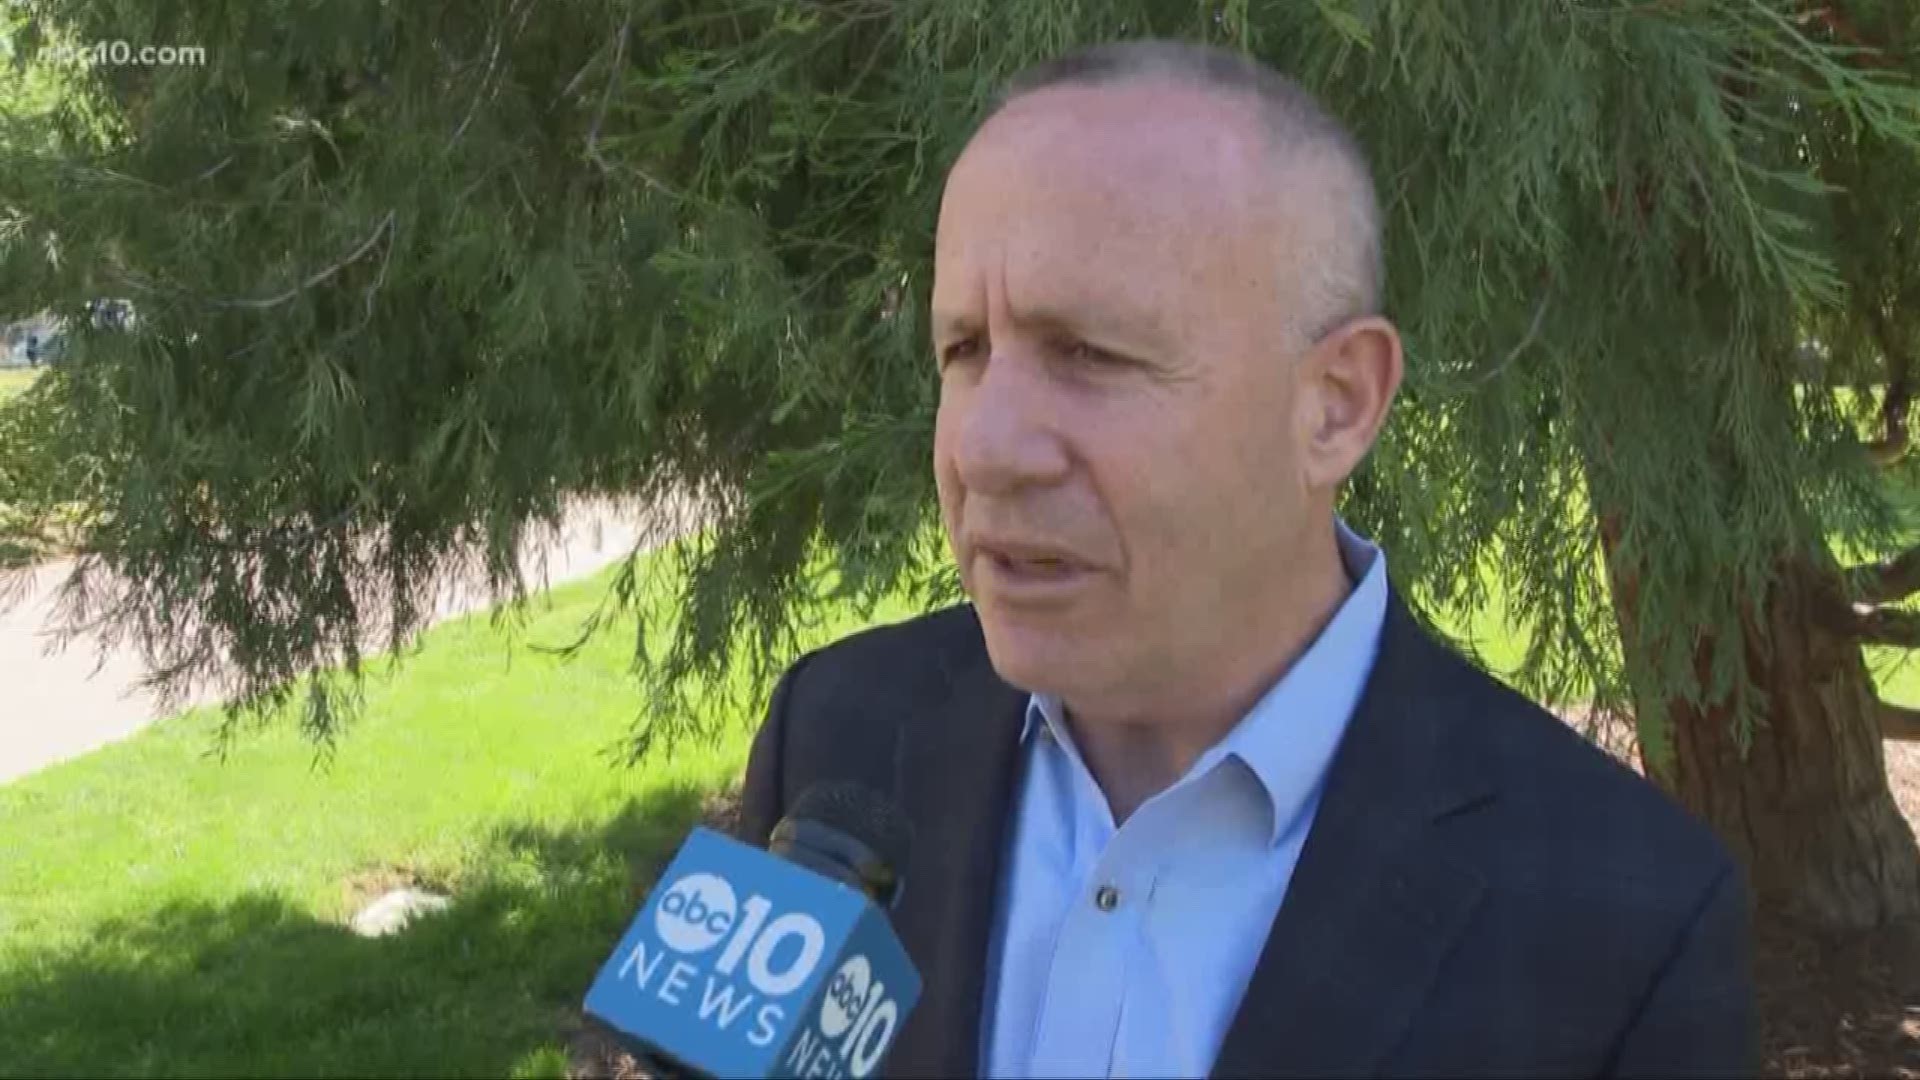 Sacramento mayor Darrell Steinberg says he's got big plans for Old Sacramento's waterfront. Watch #MorningBlend10 weekdays at 5-7 a.m. for everything you need to know to start your day.